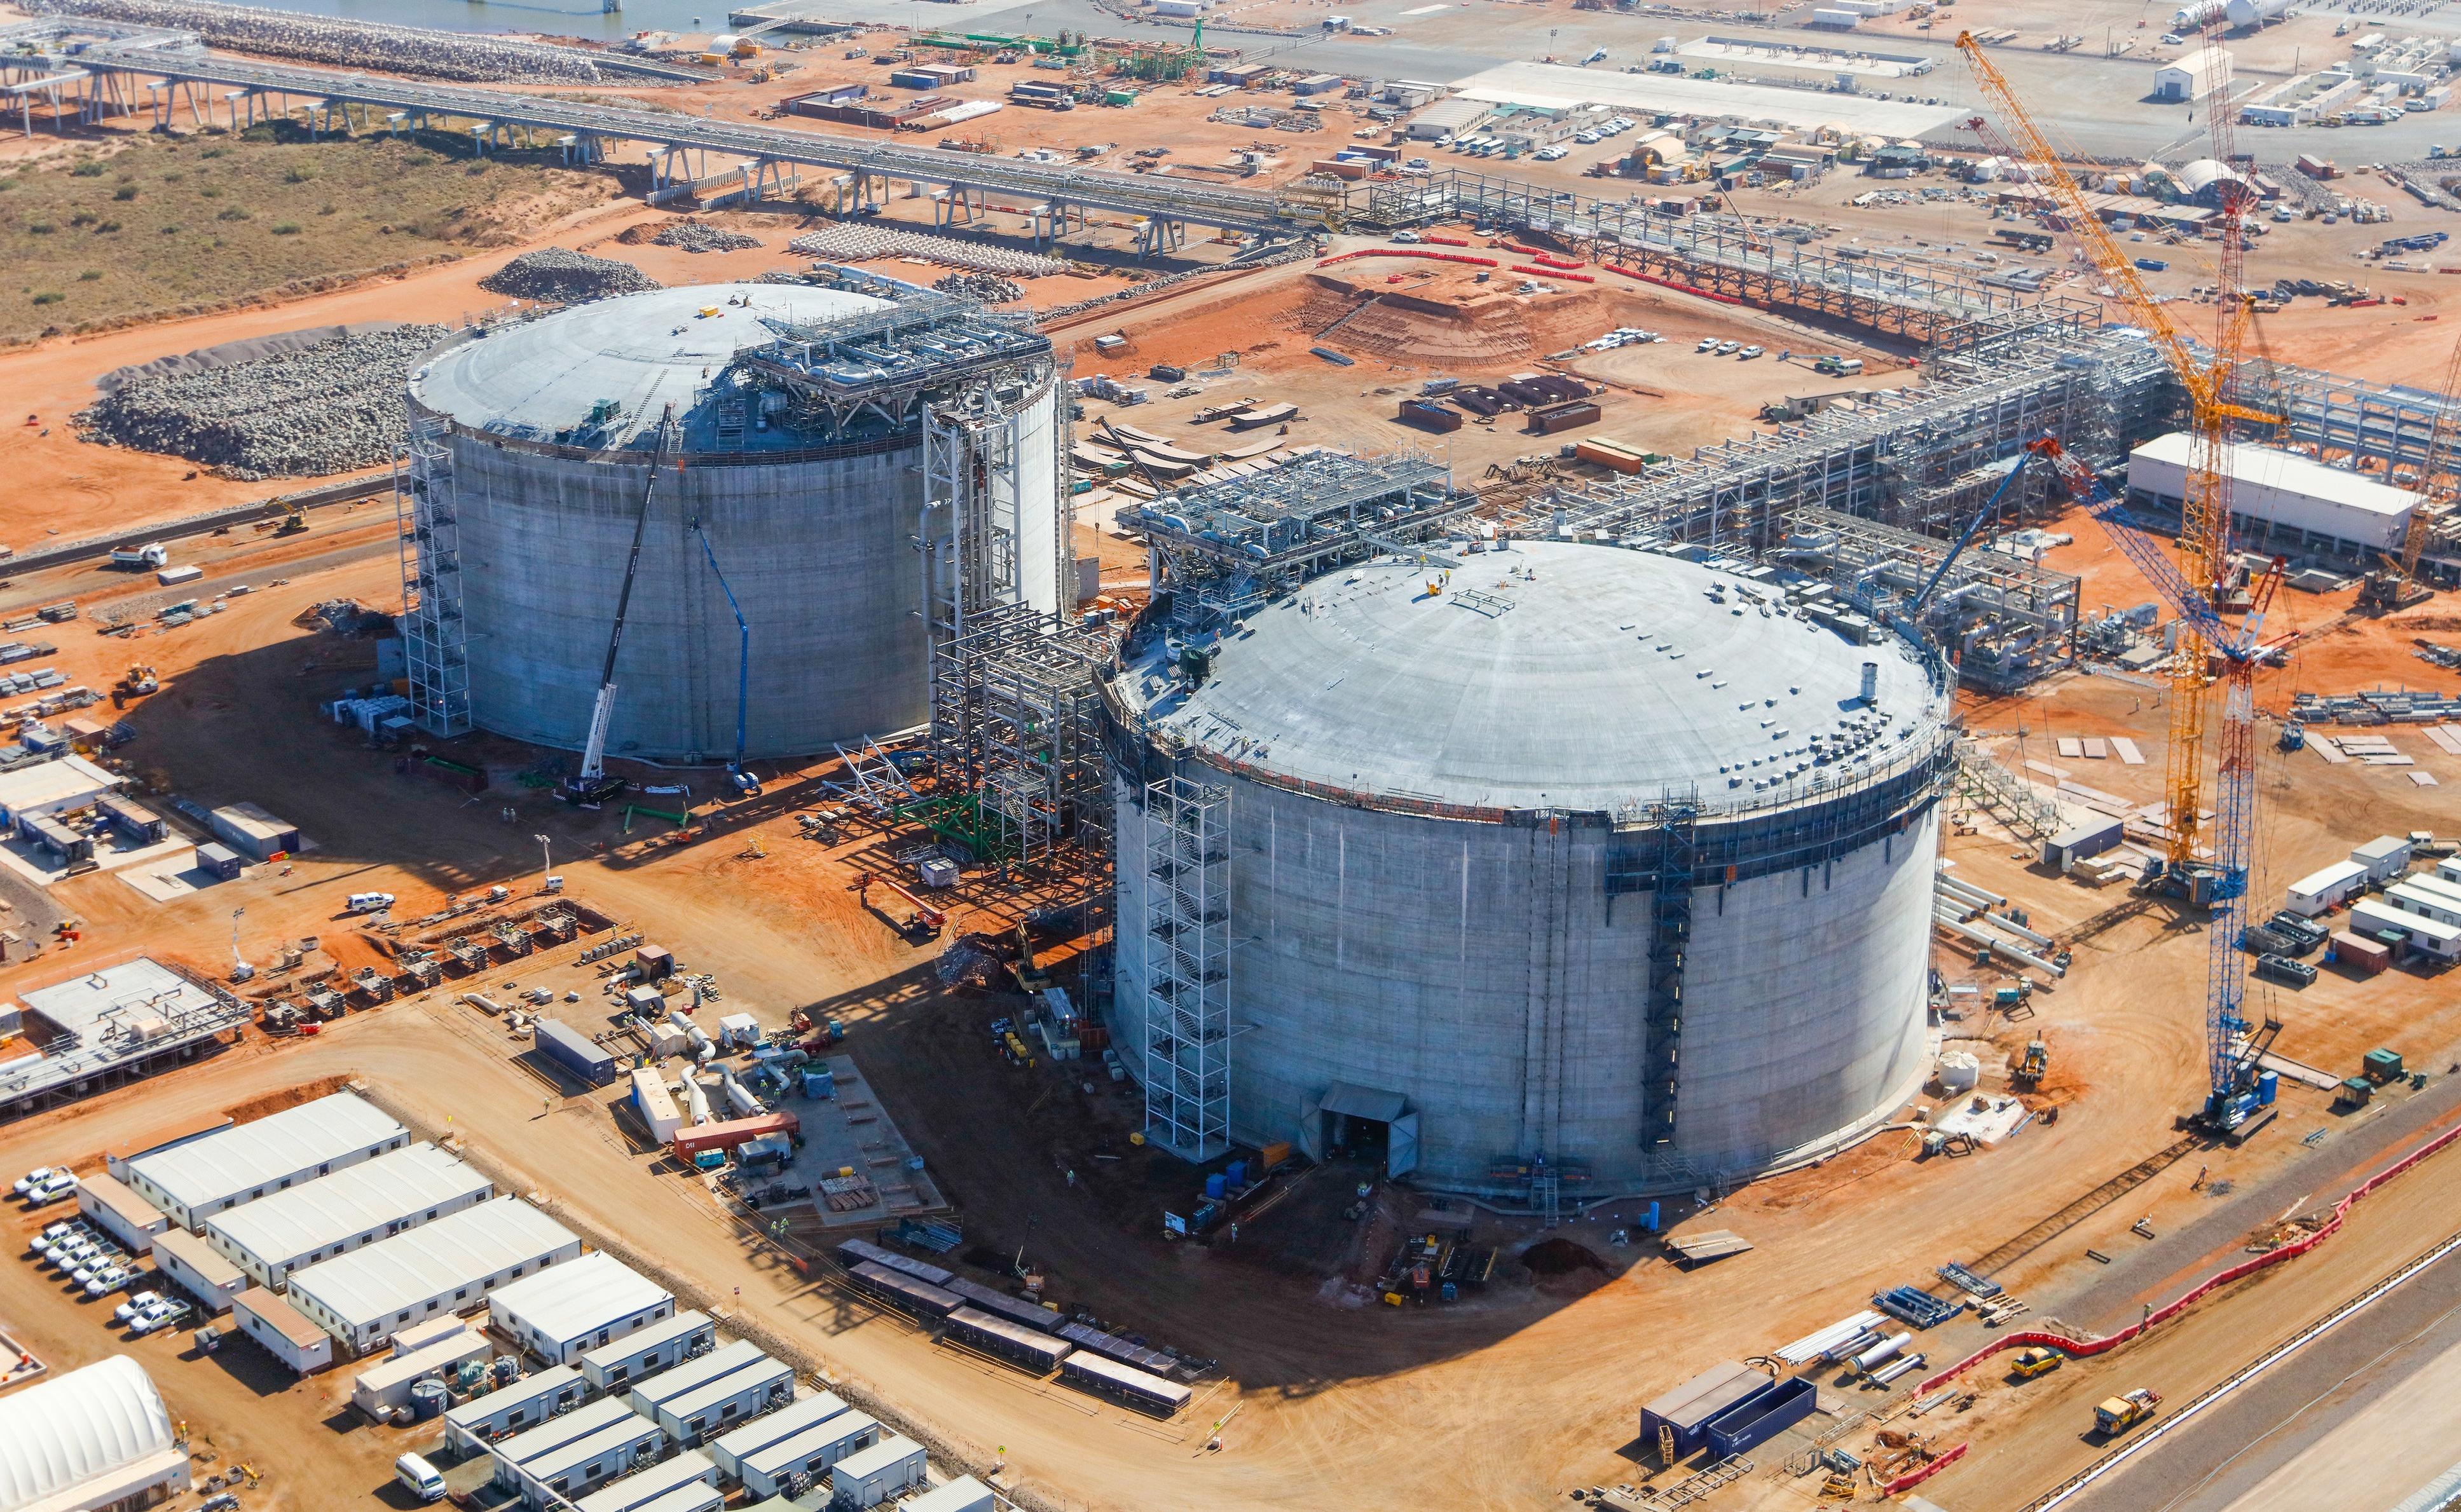 This is an aerial photograph of the Wheatstone Liquefied Natural Gas Plant, focused on the two large tanks surrounded by containers, portastations, and scaffolding.